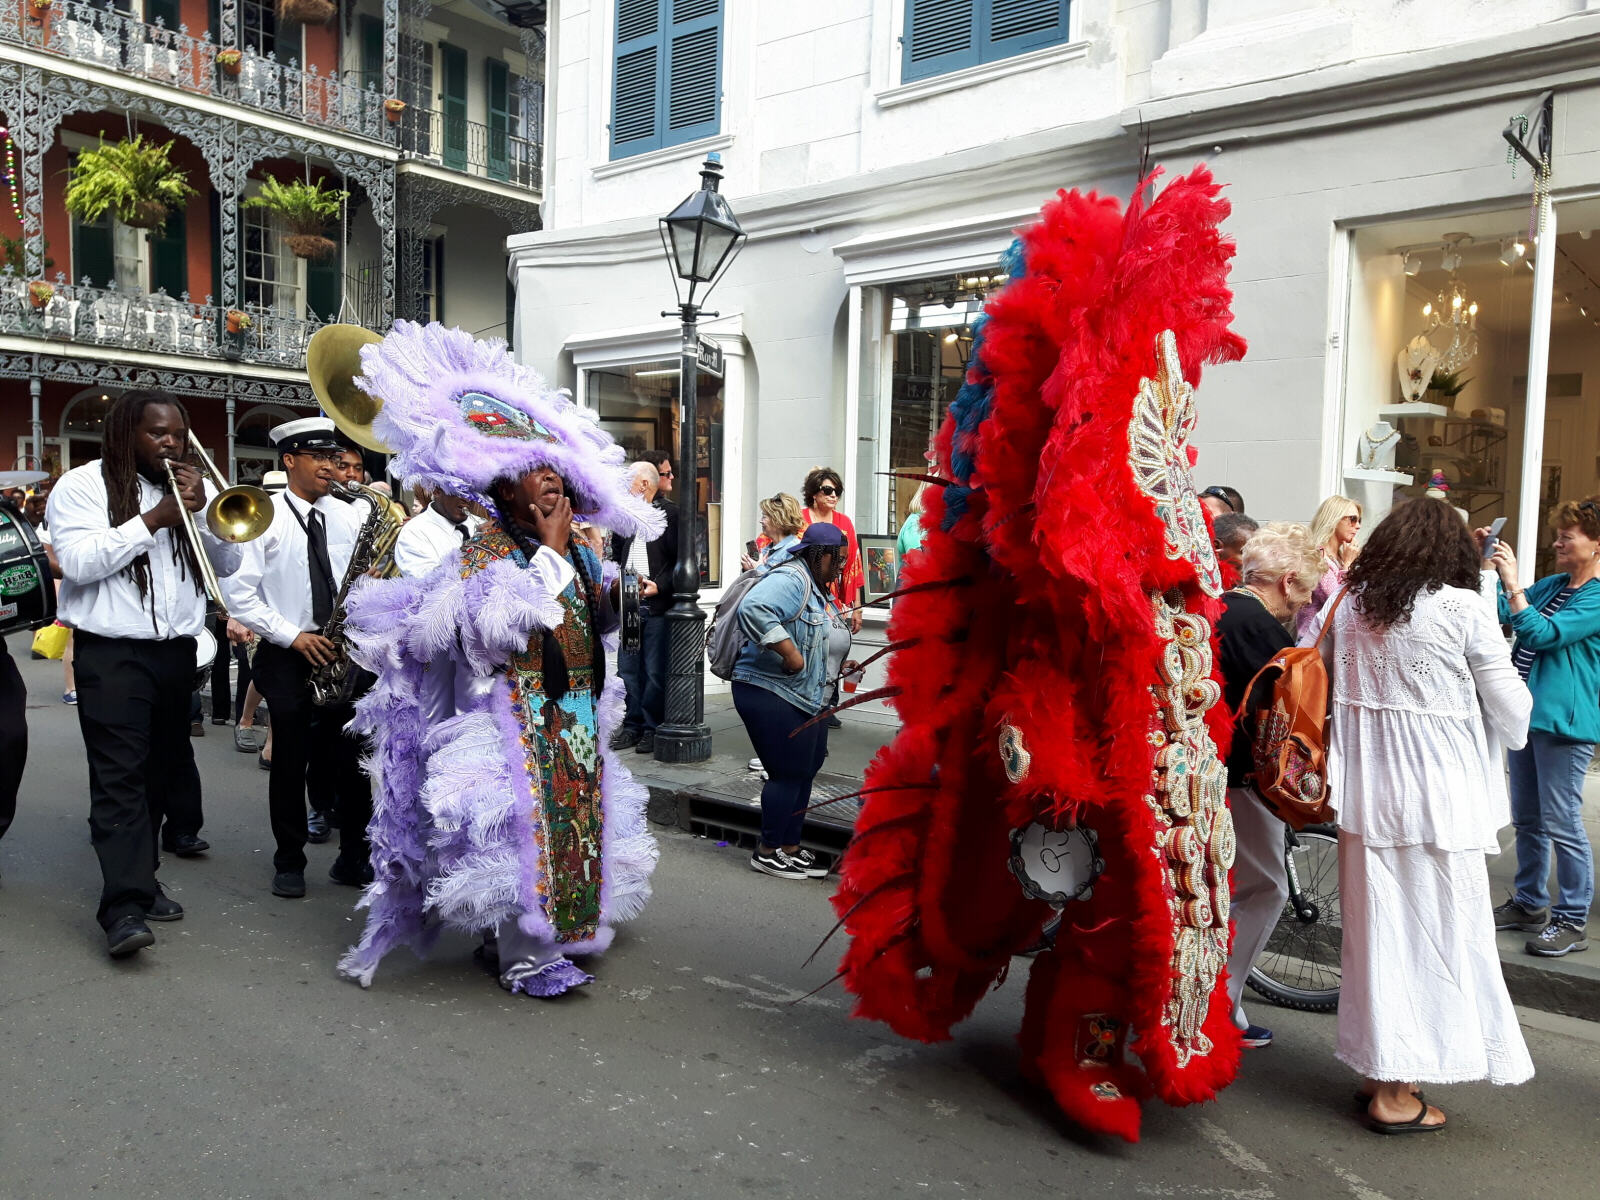 A procession in Bourbon Street, New Orleans